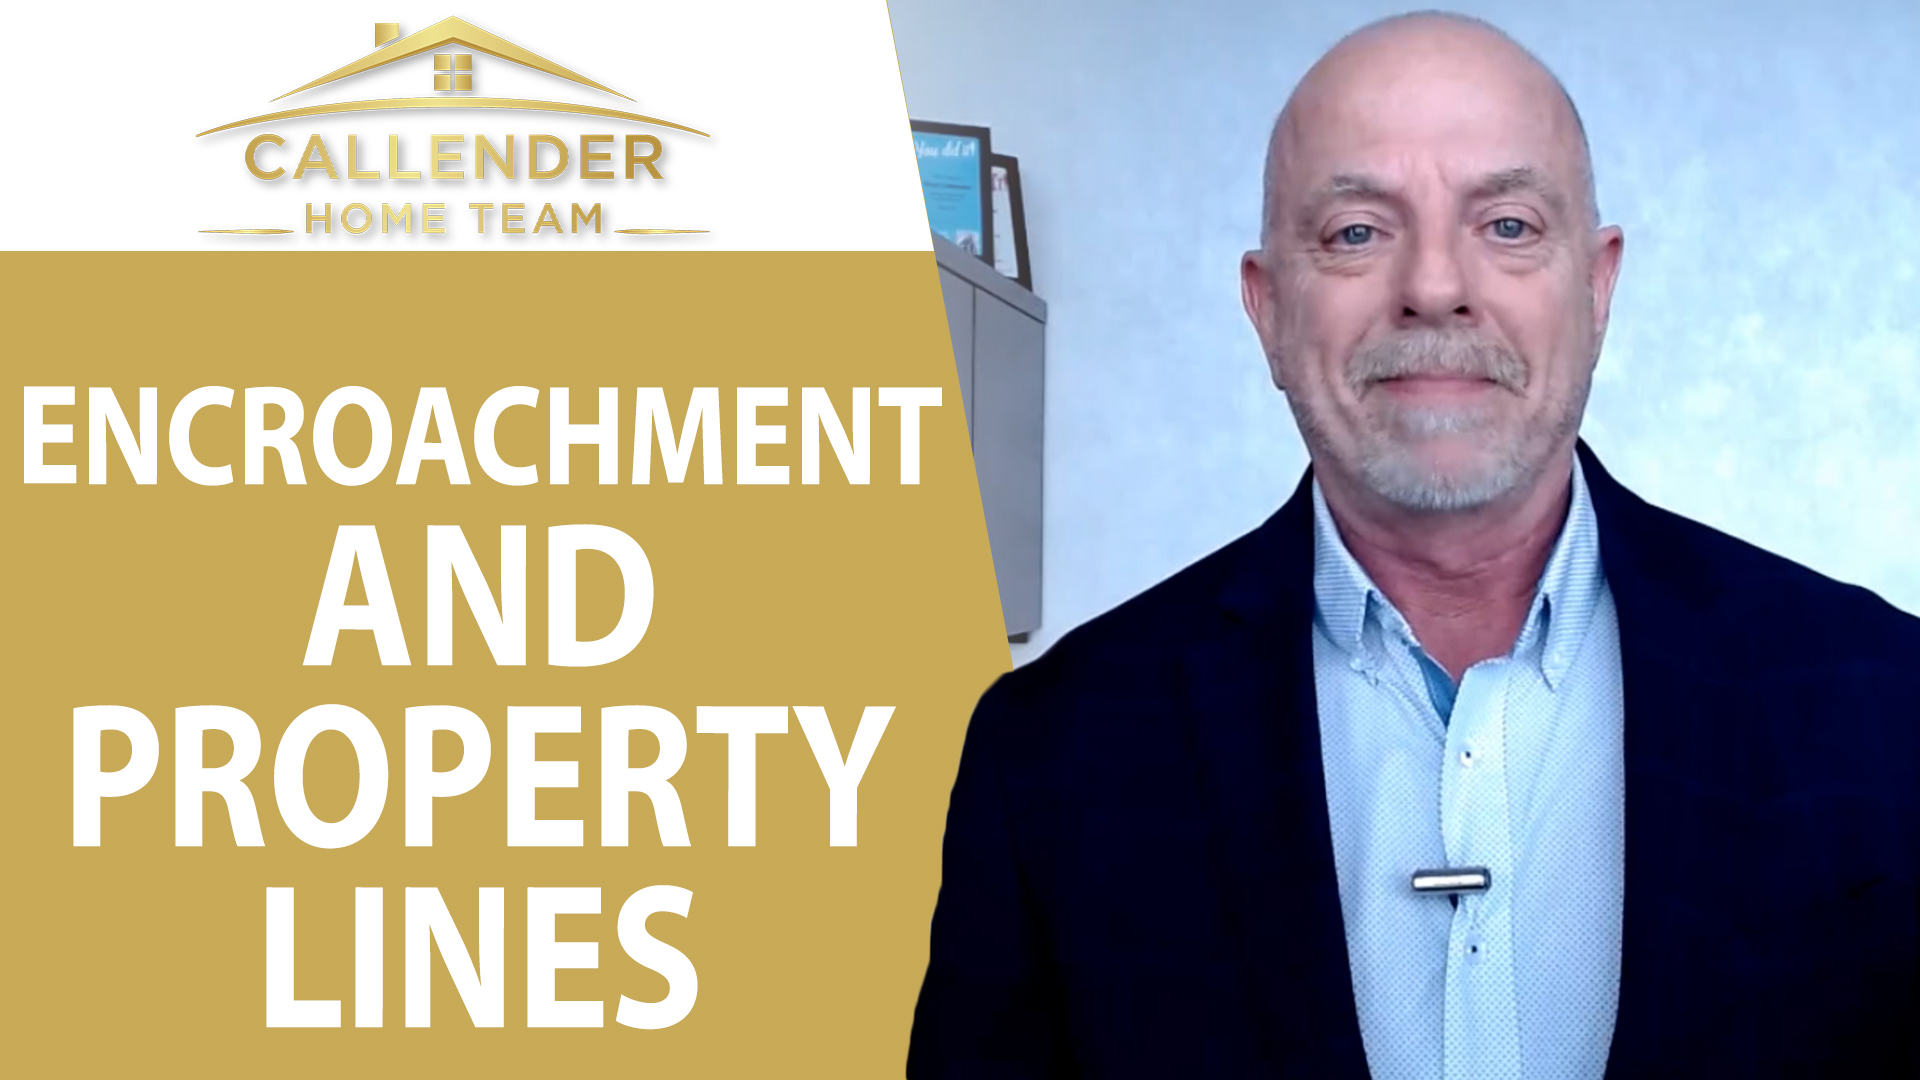 Know Your Property Lines: How To Avoid Encroachments and Legal Trouble